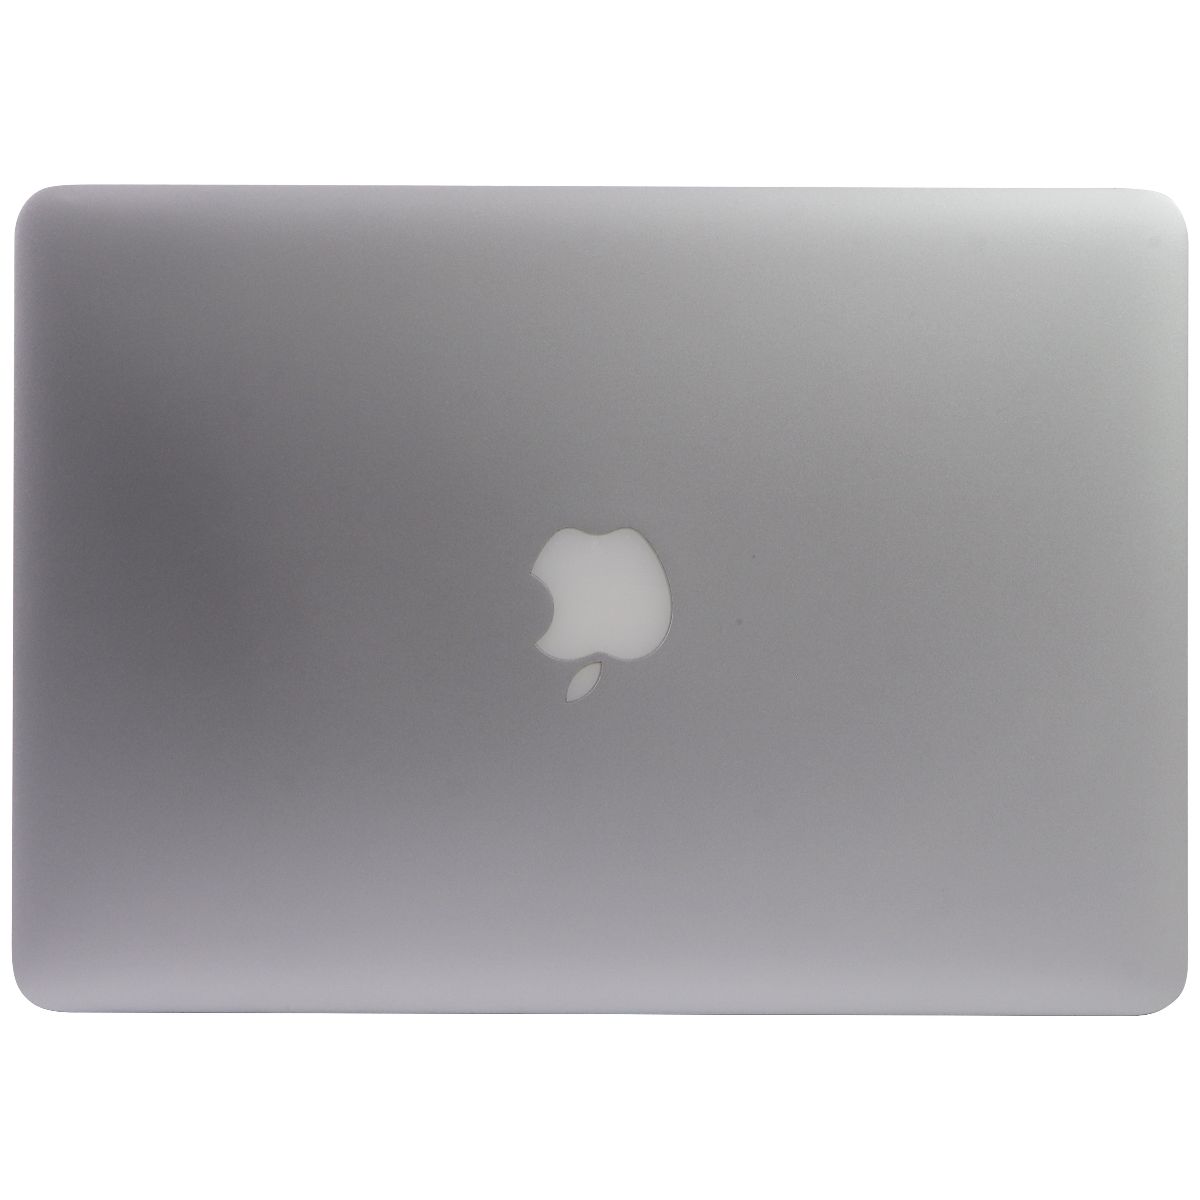 Apple MacBook Pro (13.3 in) Laptop (A1502) i5-5257U 256GB SSD/8GB - Silver Laptops - Apple Laptops Apple    - Simple Cell Bulk Wholesale Pricing - USA Seller